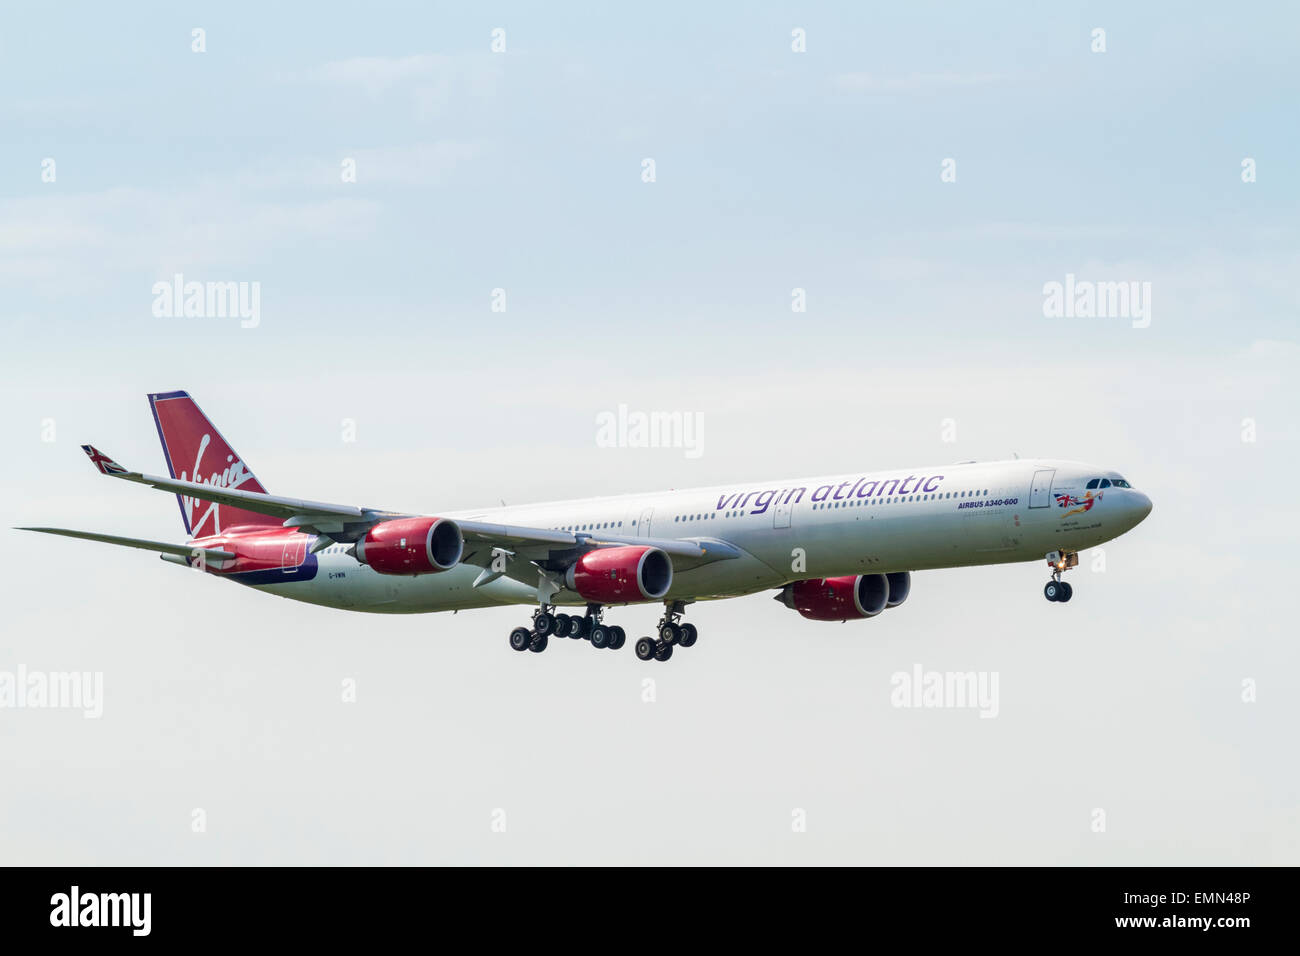 Virgin Atlantic Airbus A340-600 plane, G-VWIN, named Lady Luck, coming in to land. Stock Photo